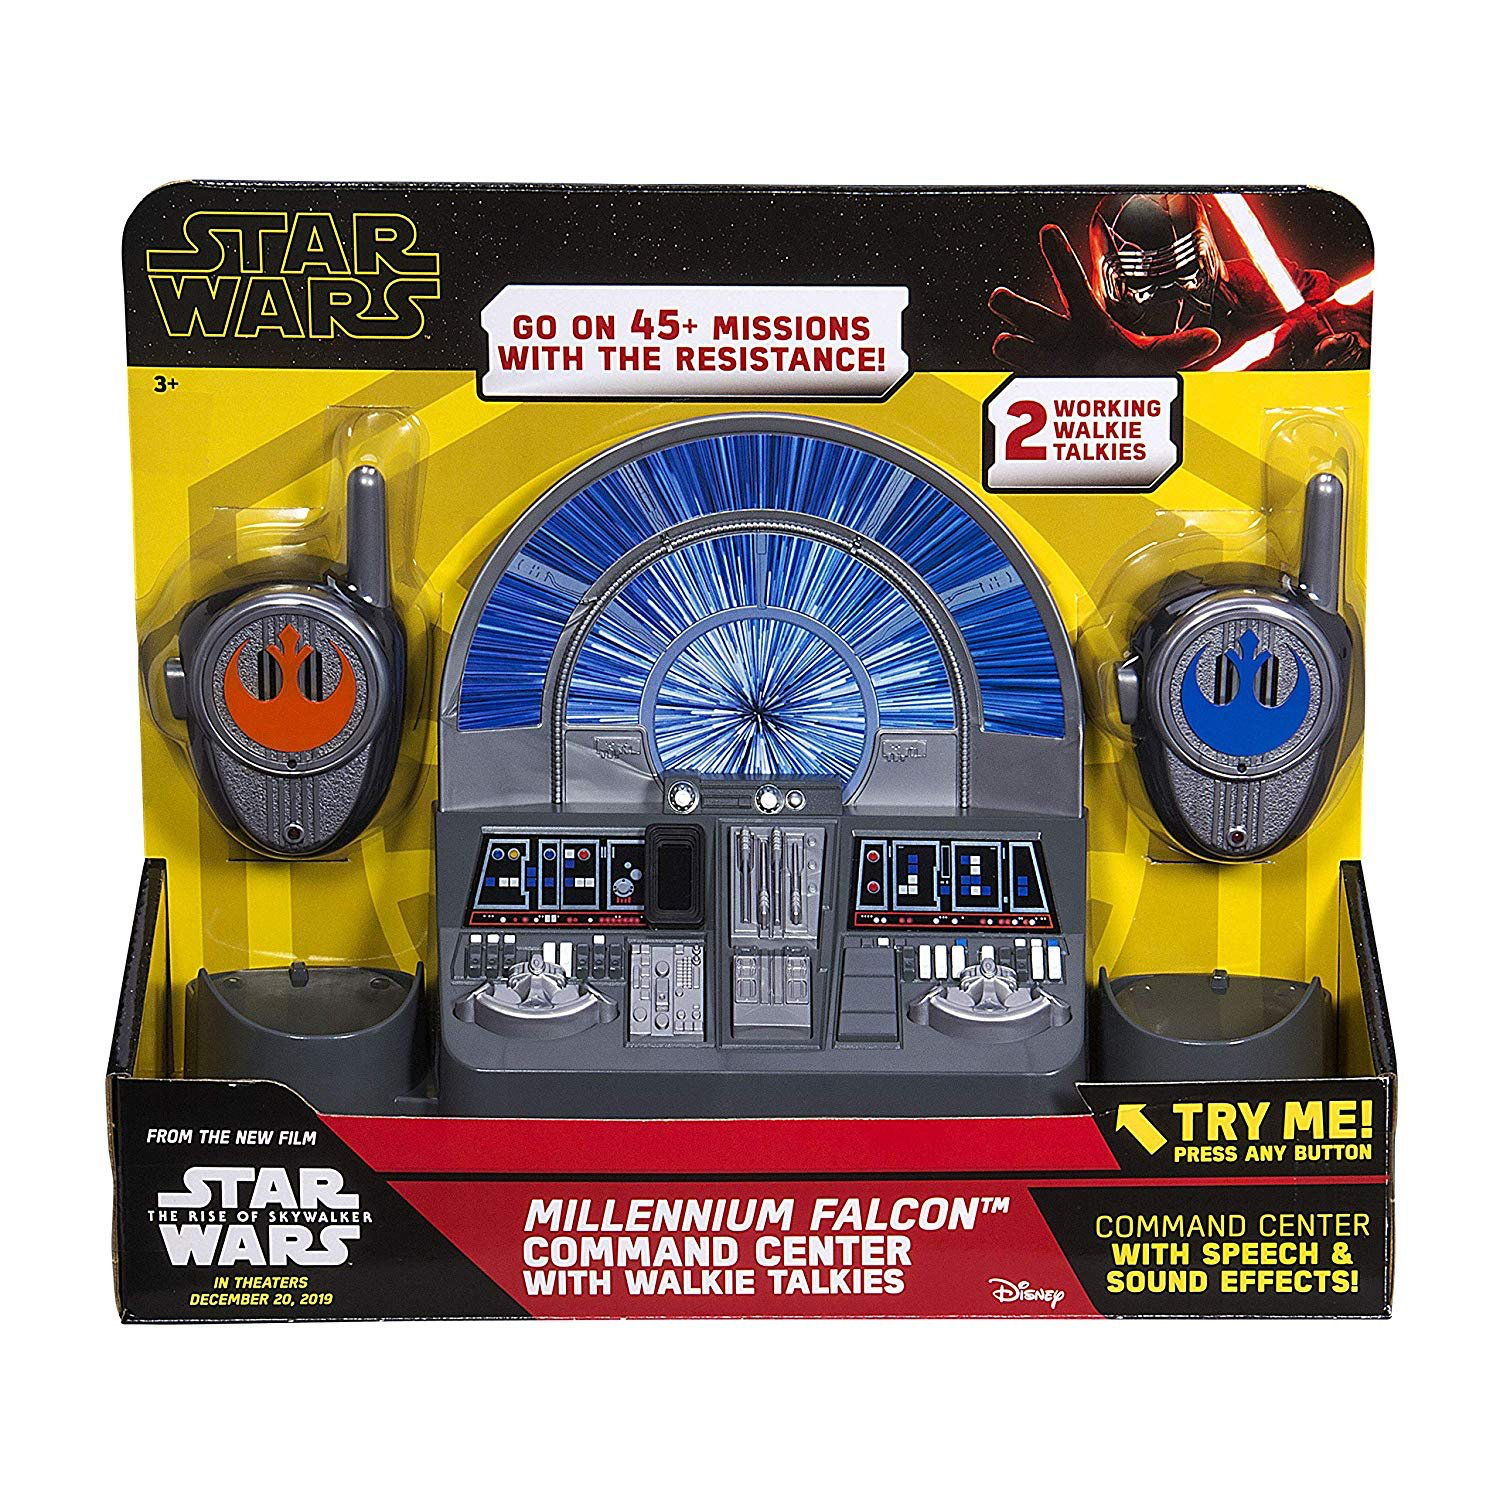 New Rise of Skywalker Millennium Falcon Command Center available!